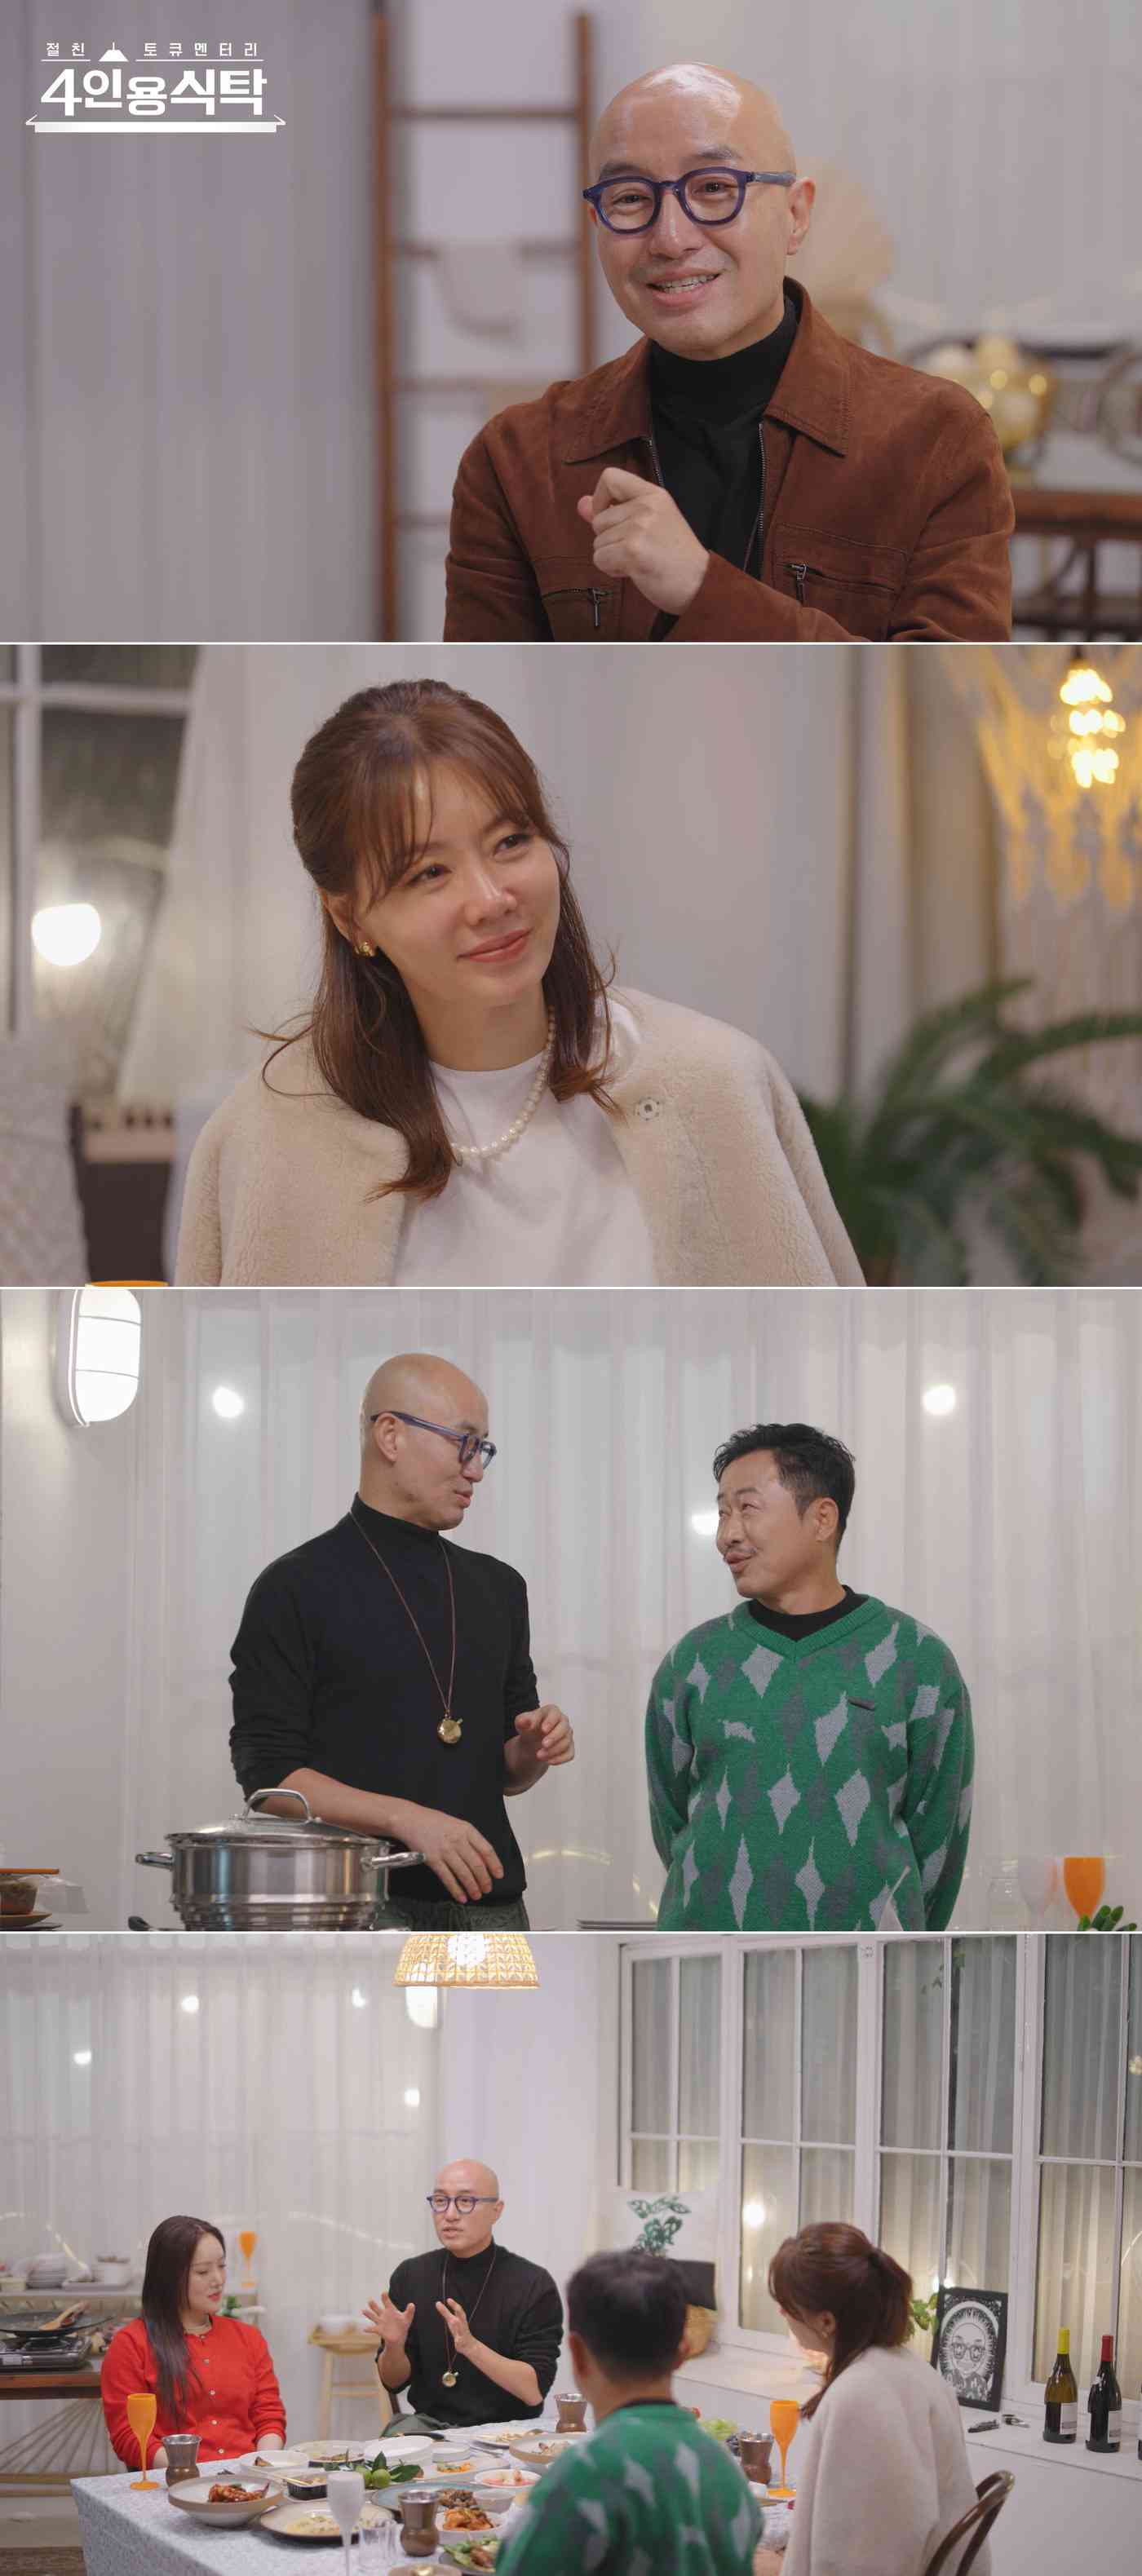 Hong Seok-cheon Opens Up About Life After Coming Out: A ‘Table for Four’ Documentary